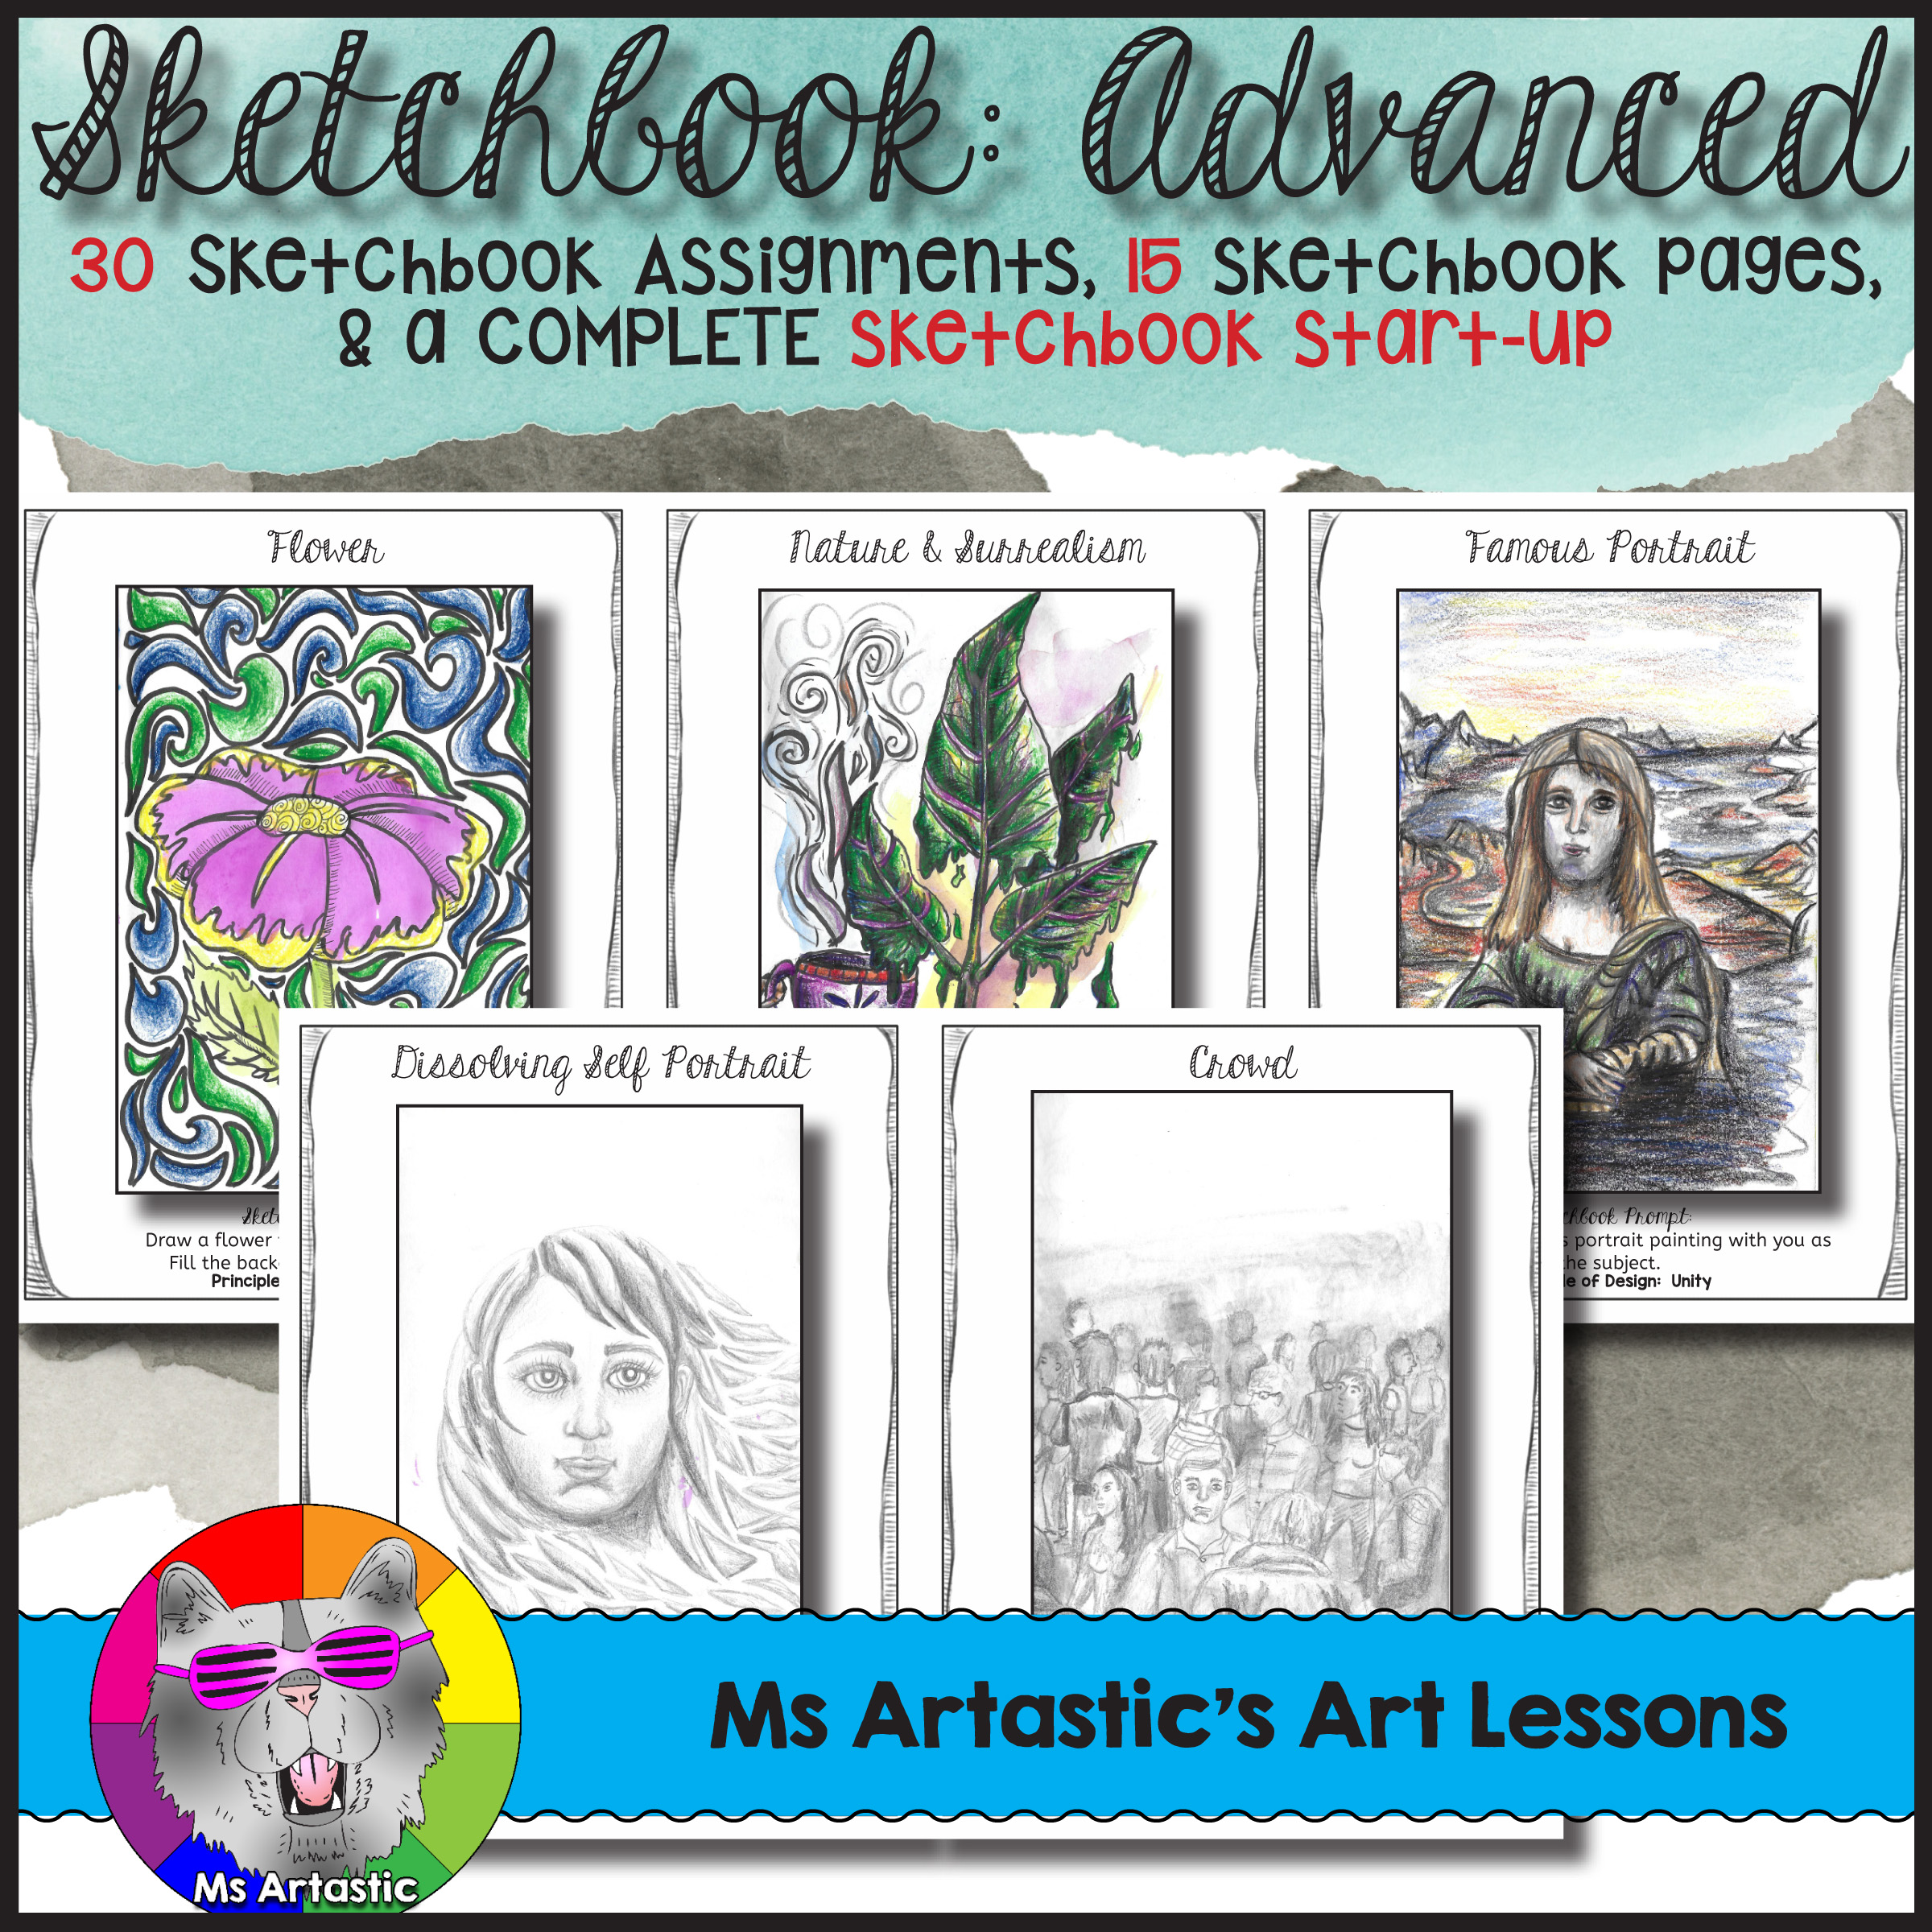 If you're able to set a routine for working on sketchbook assignments, set up expectations of experimentation and quality by using examples of completed sketchbook prompts, and have a unit plan with an aim of what you'll cover, then you should be able to implement sketchbooks into your classroom in a meaningful way.